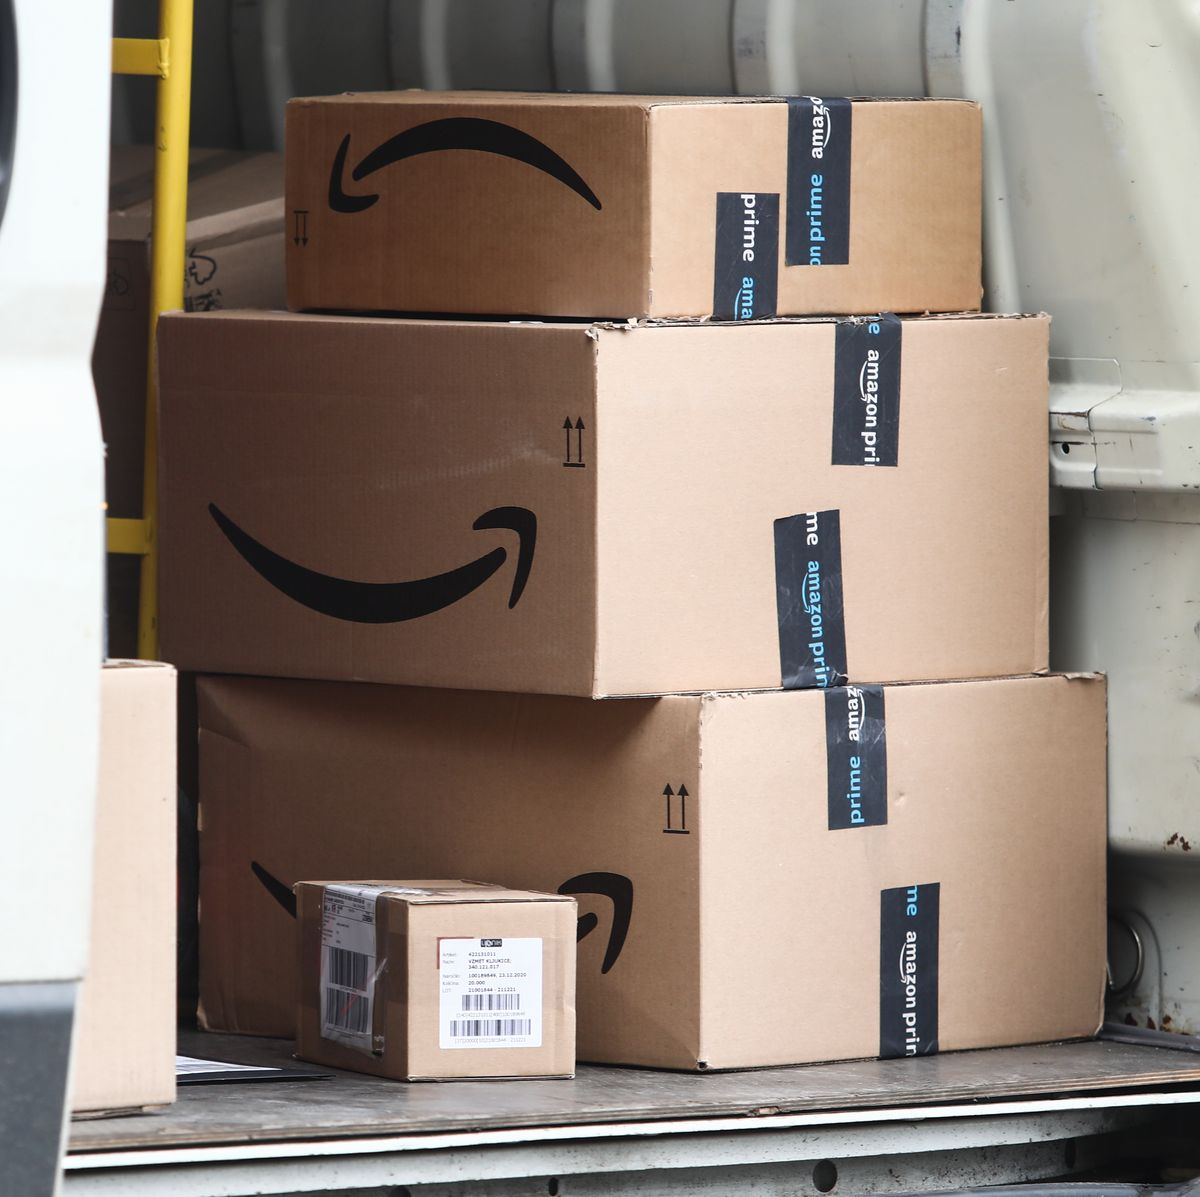 https://hips.hearstapps.com/hmg-prod/images/amazon-boxes-are-seen-inside-a-delivery-truck-in-krakow-news-photo-1666909664.jpg?crop=0.668xw:1.00xh;0.167xw,0&resize=1200:*